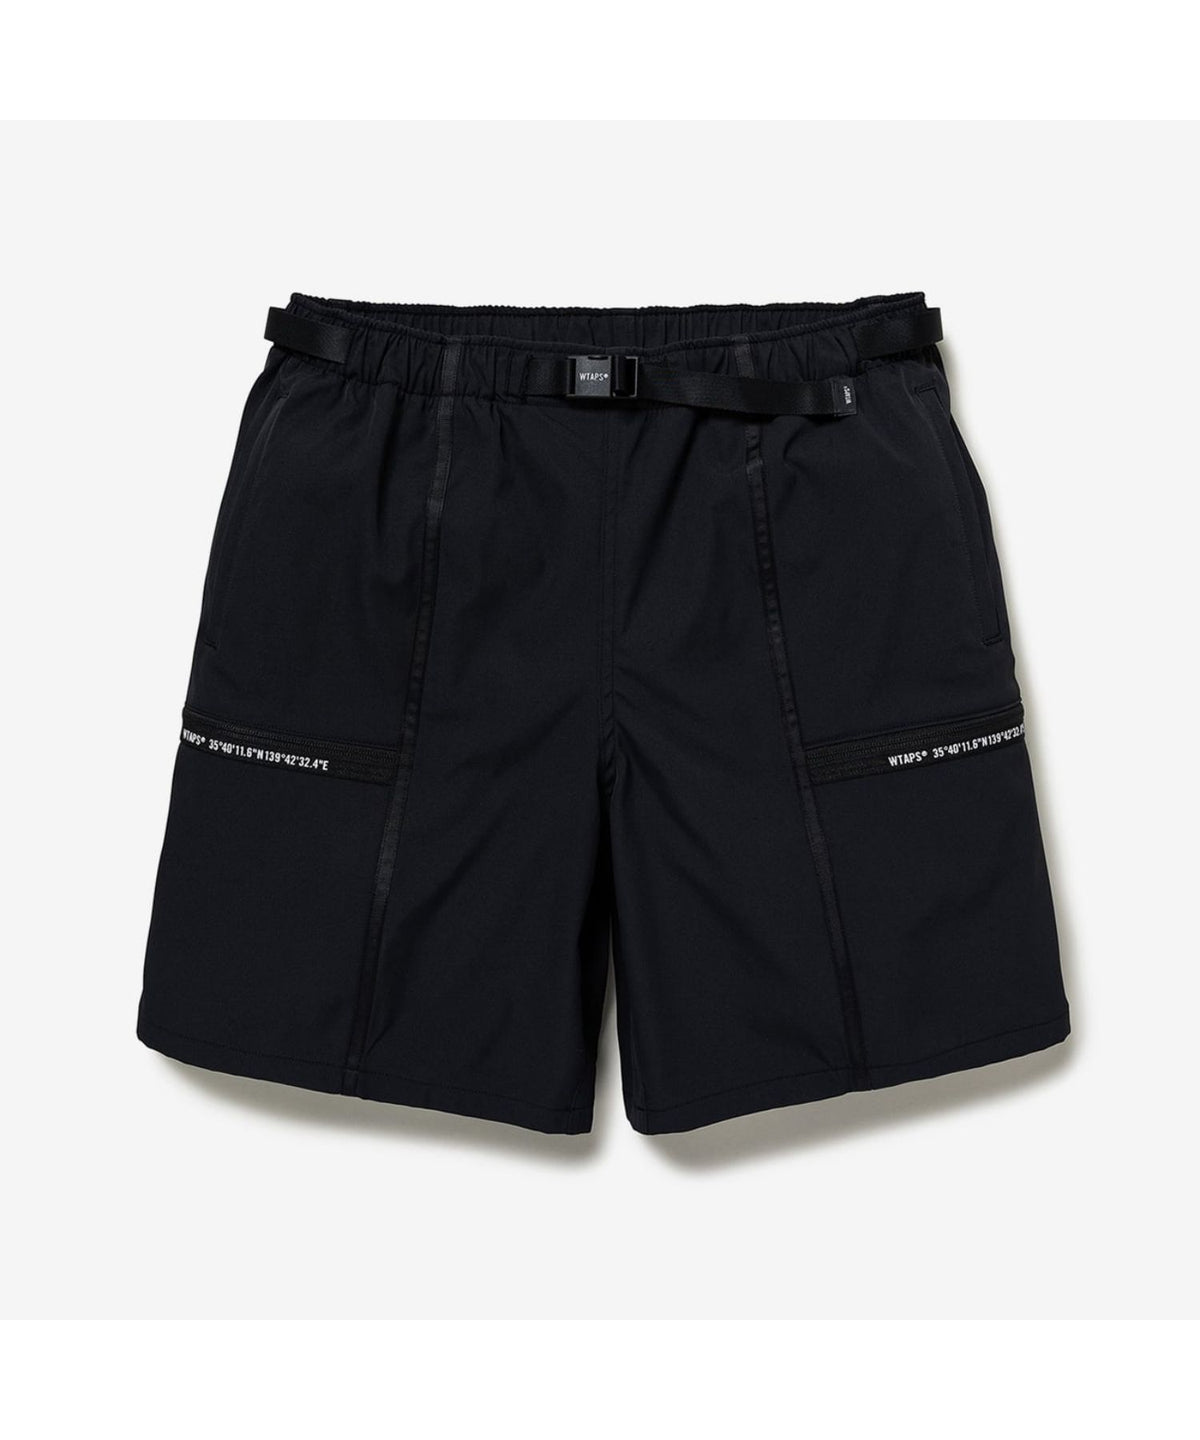 SPSS2001 / SHORTS / POLY. TWILL